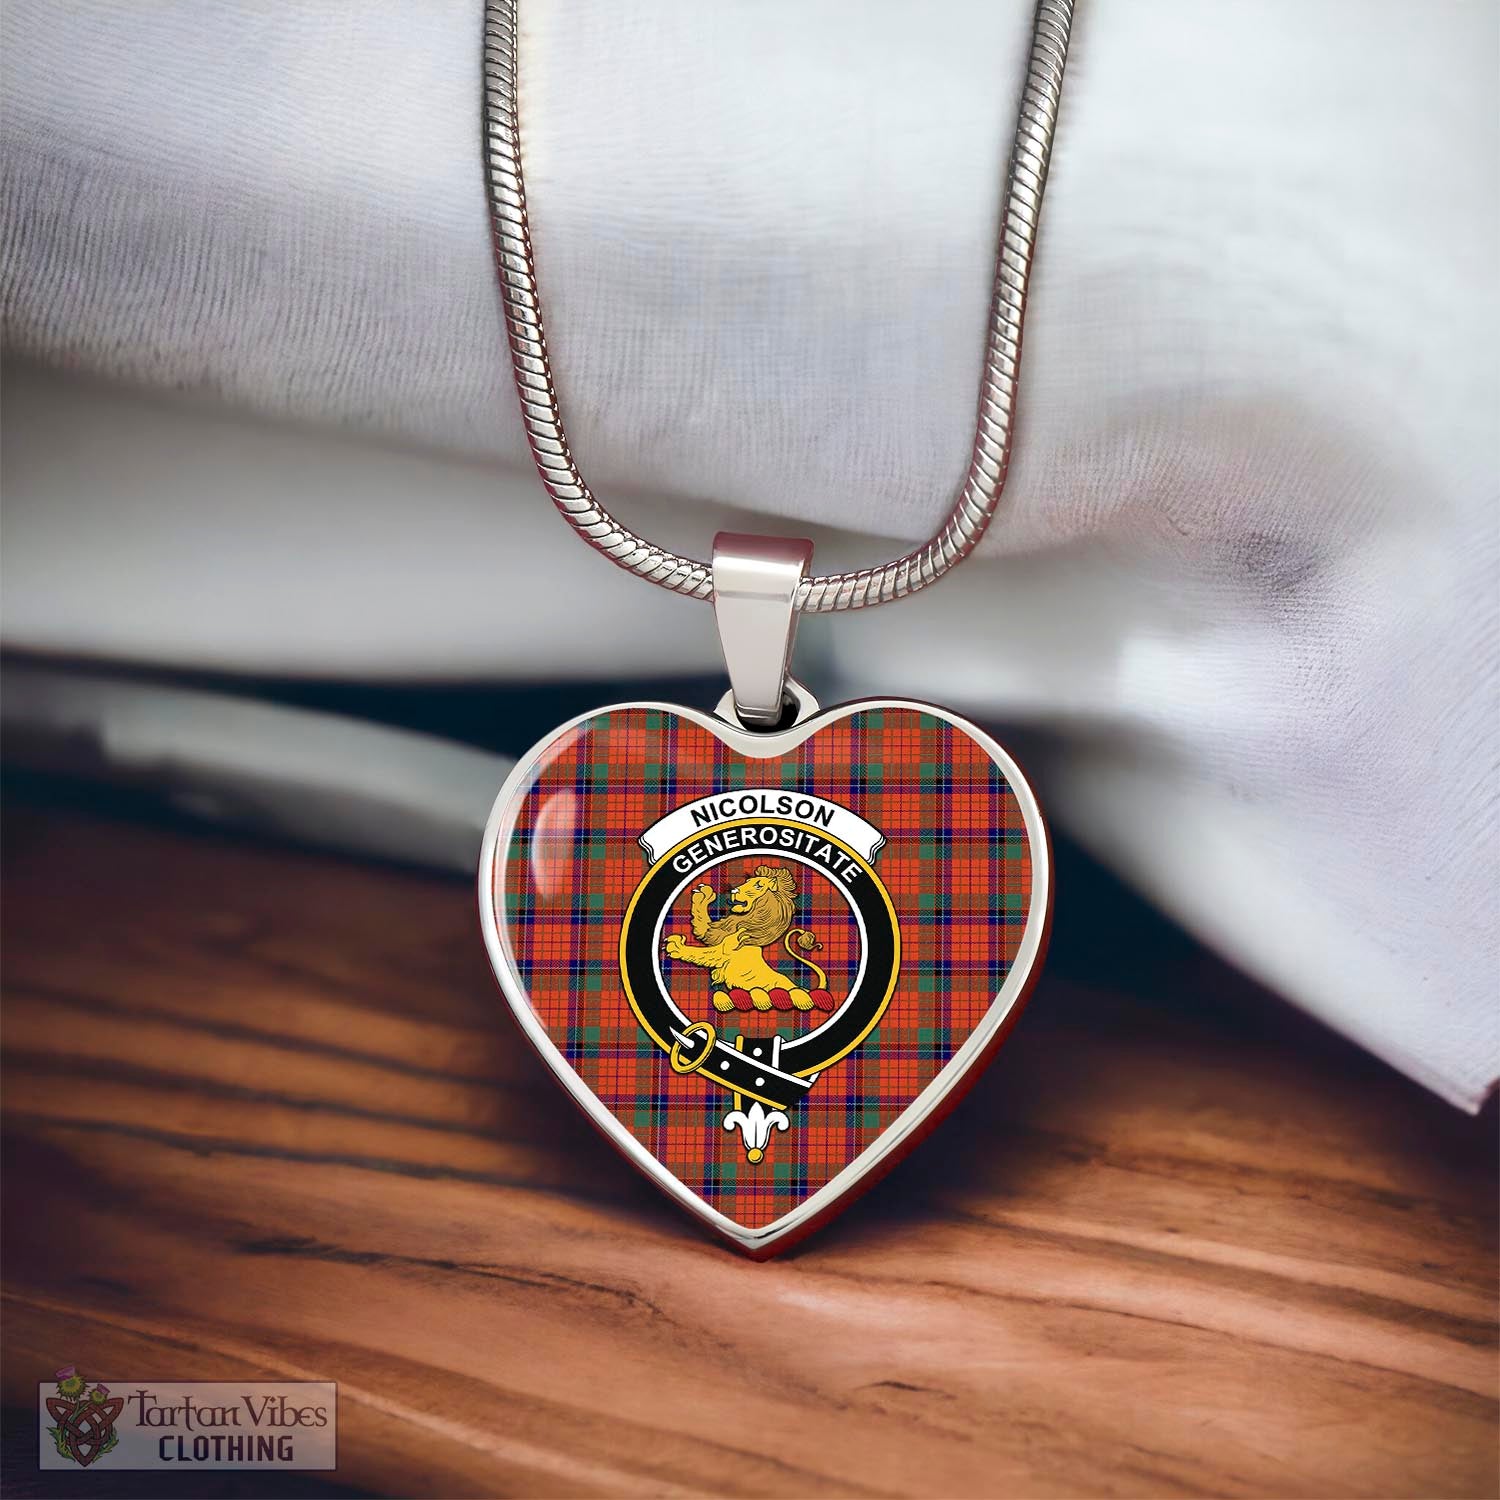 Tartan Vibes Clothing Nicolson Ancient Tartan Heart Necklace with Family Crest